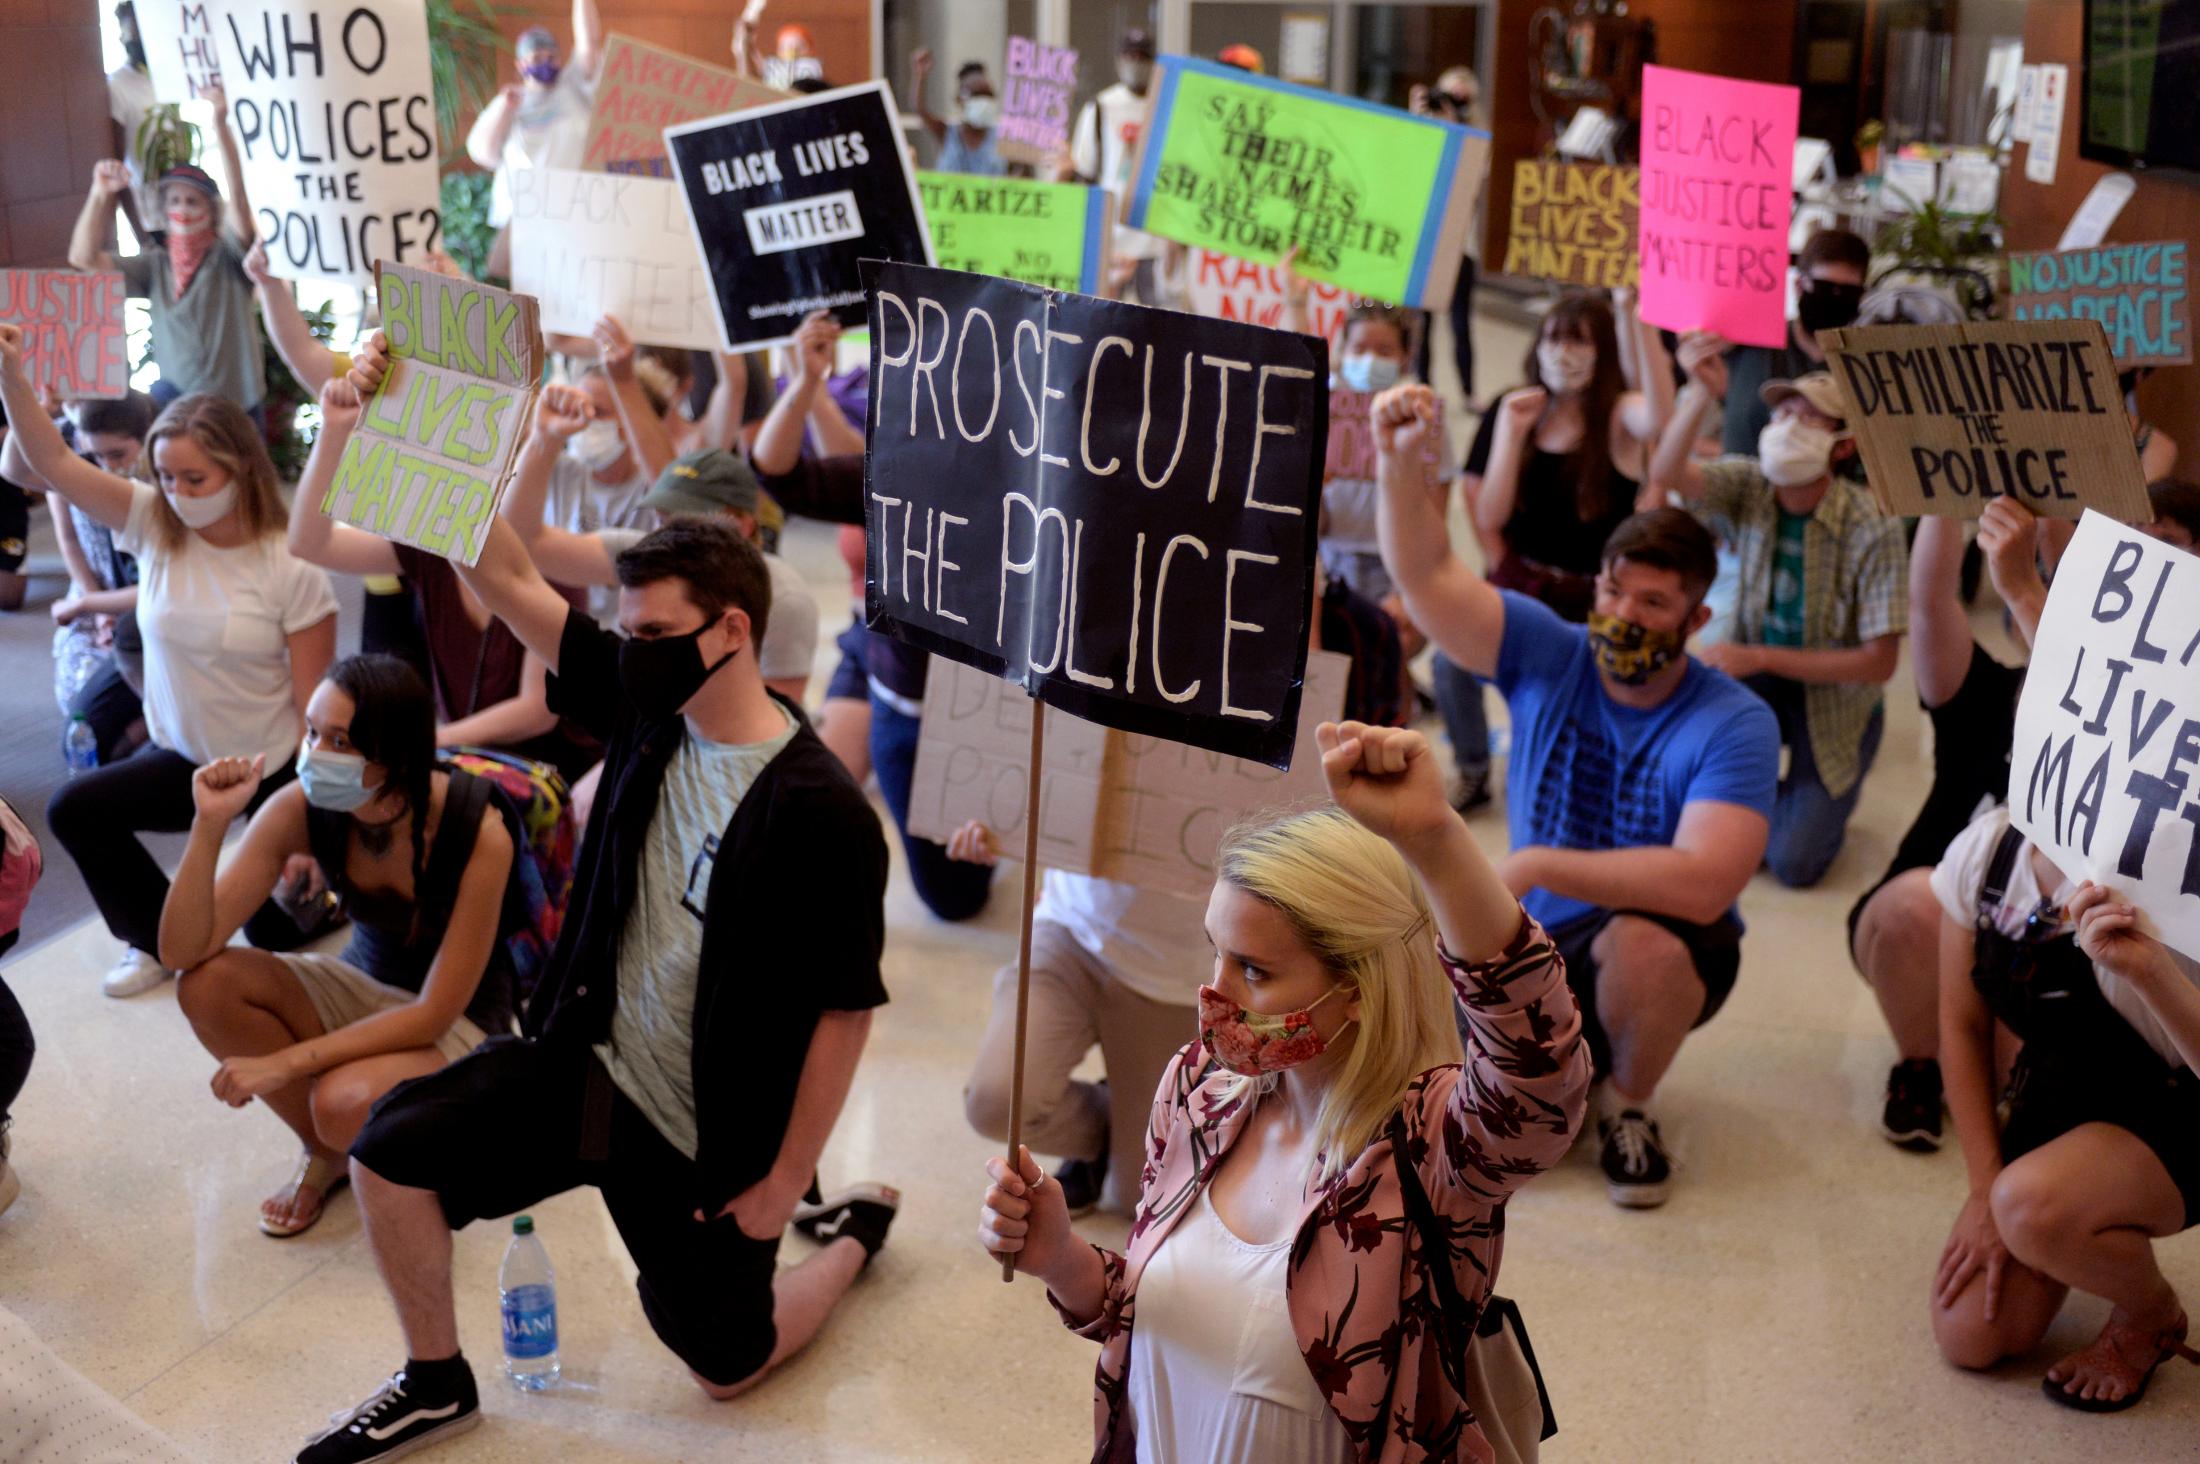 A Summer of Social Justice - Rally attendees kneel while holding up protest signs on...